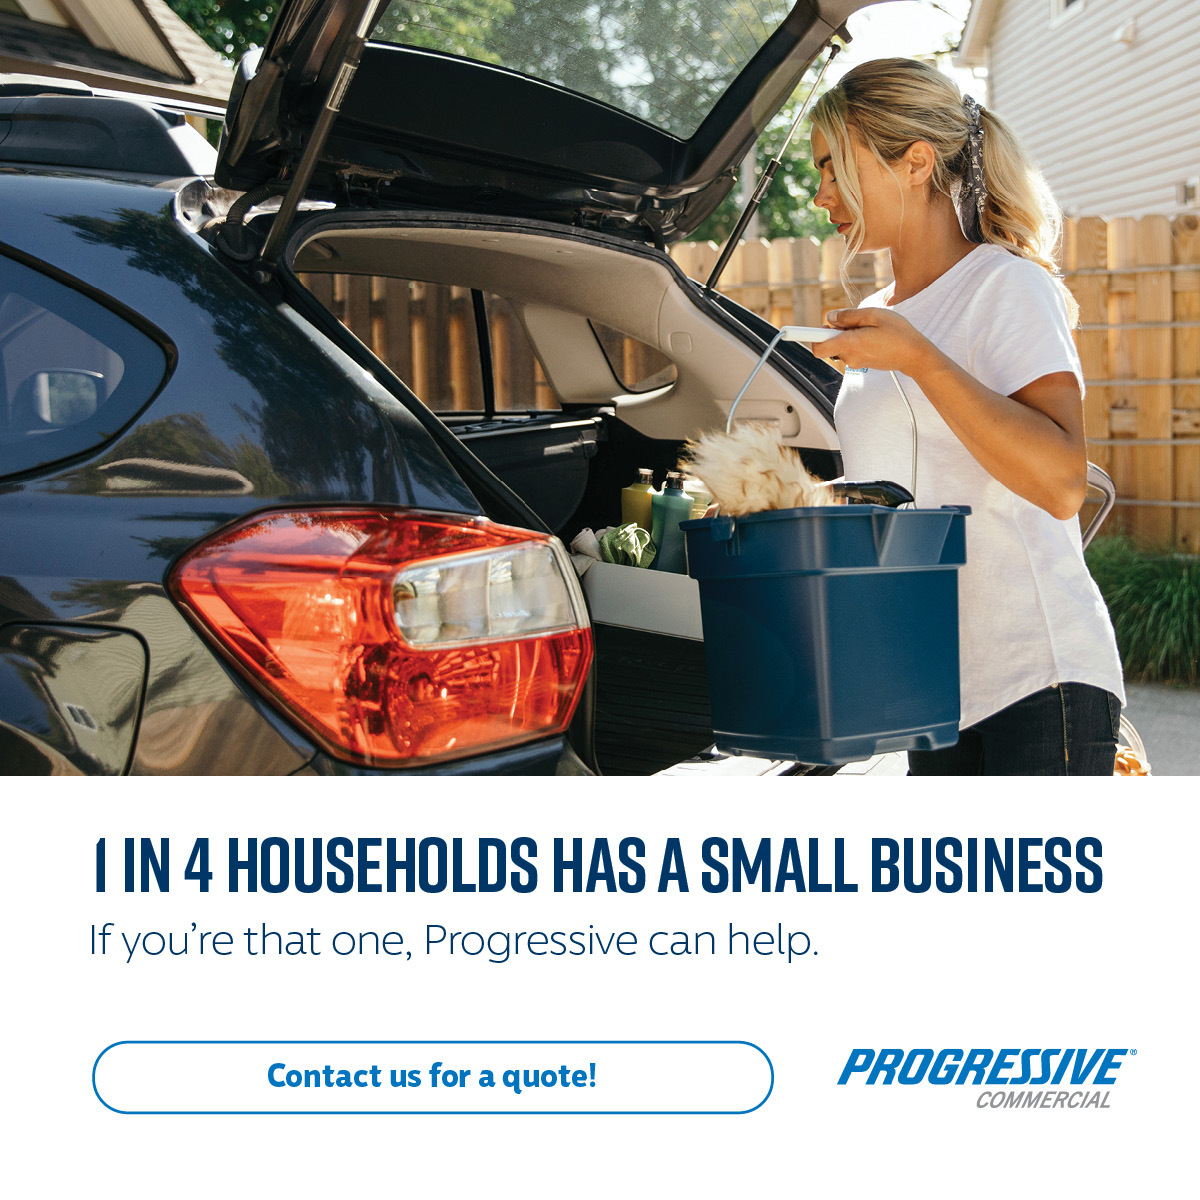 If you or a friend own a small business, we’re here for you! Ask us about Progressive Commercial insurance today. #pgragent #smallbusiness #needcommercialauto #commercialauto